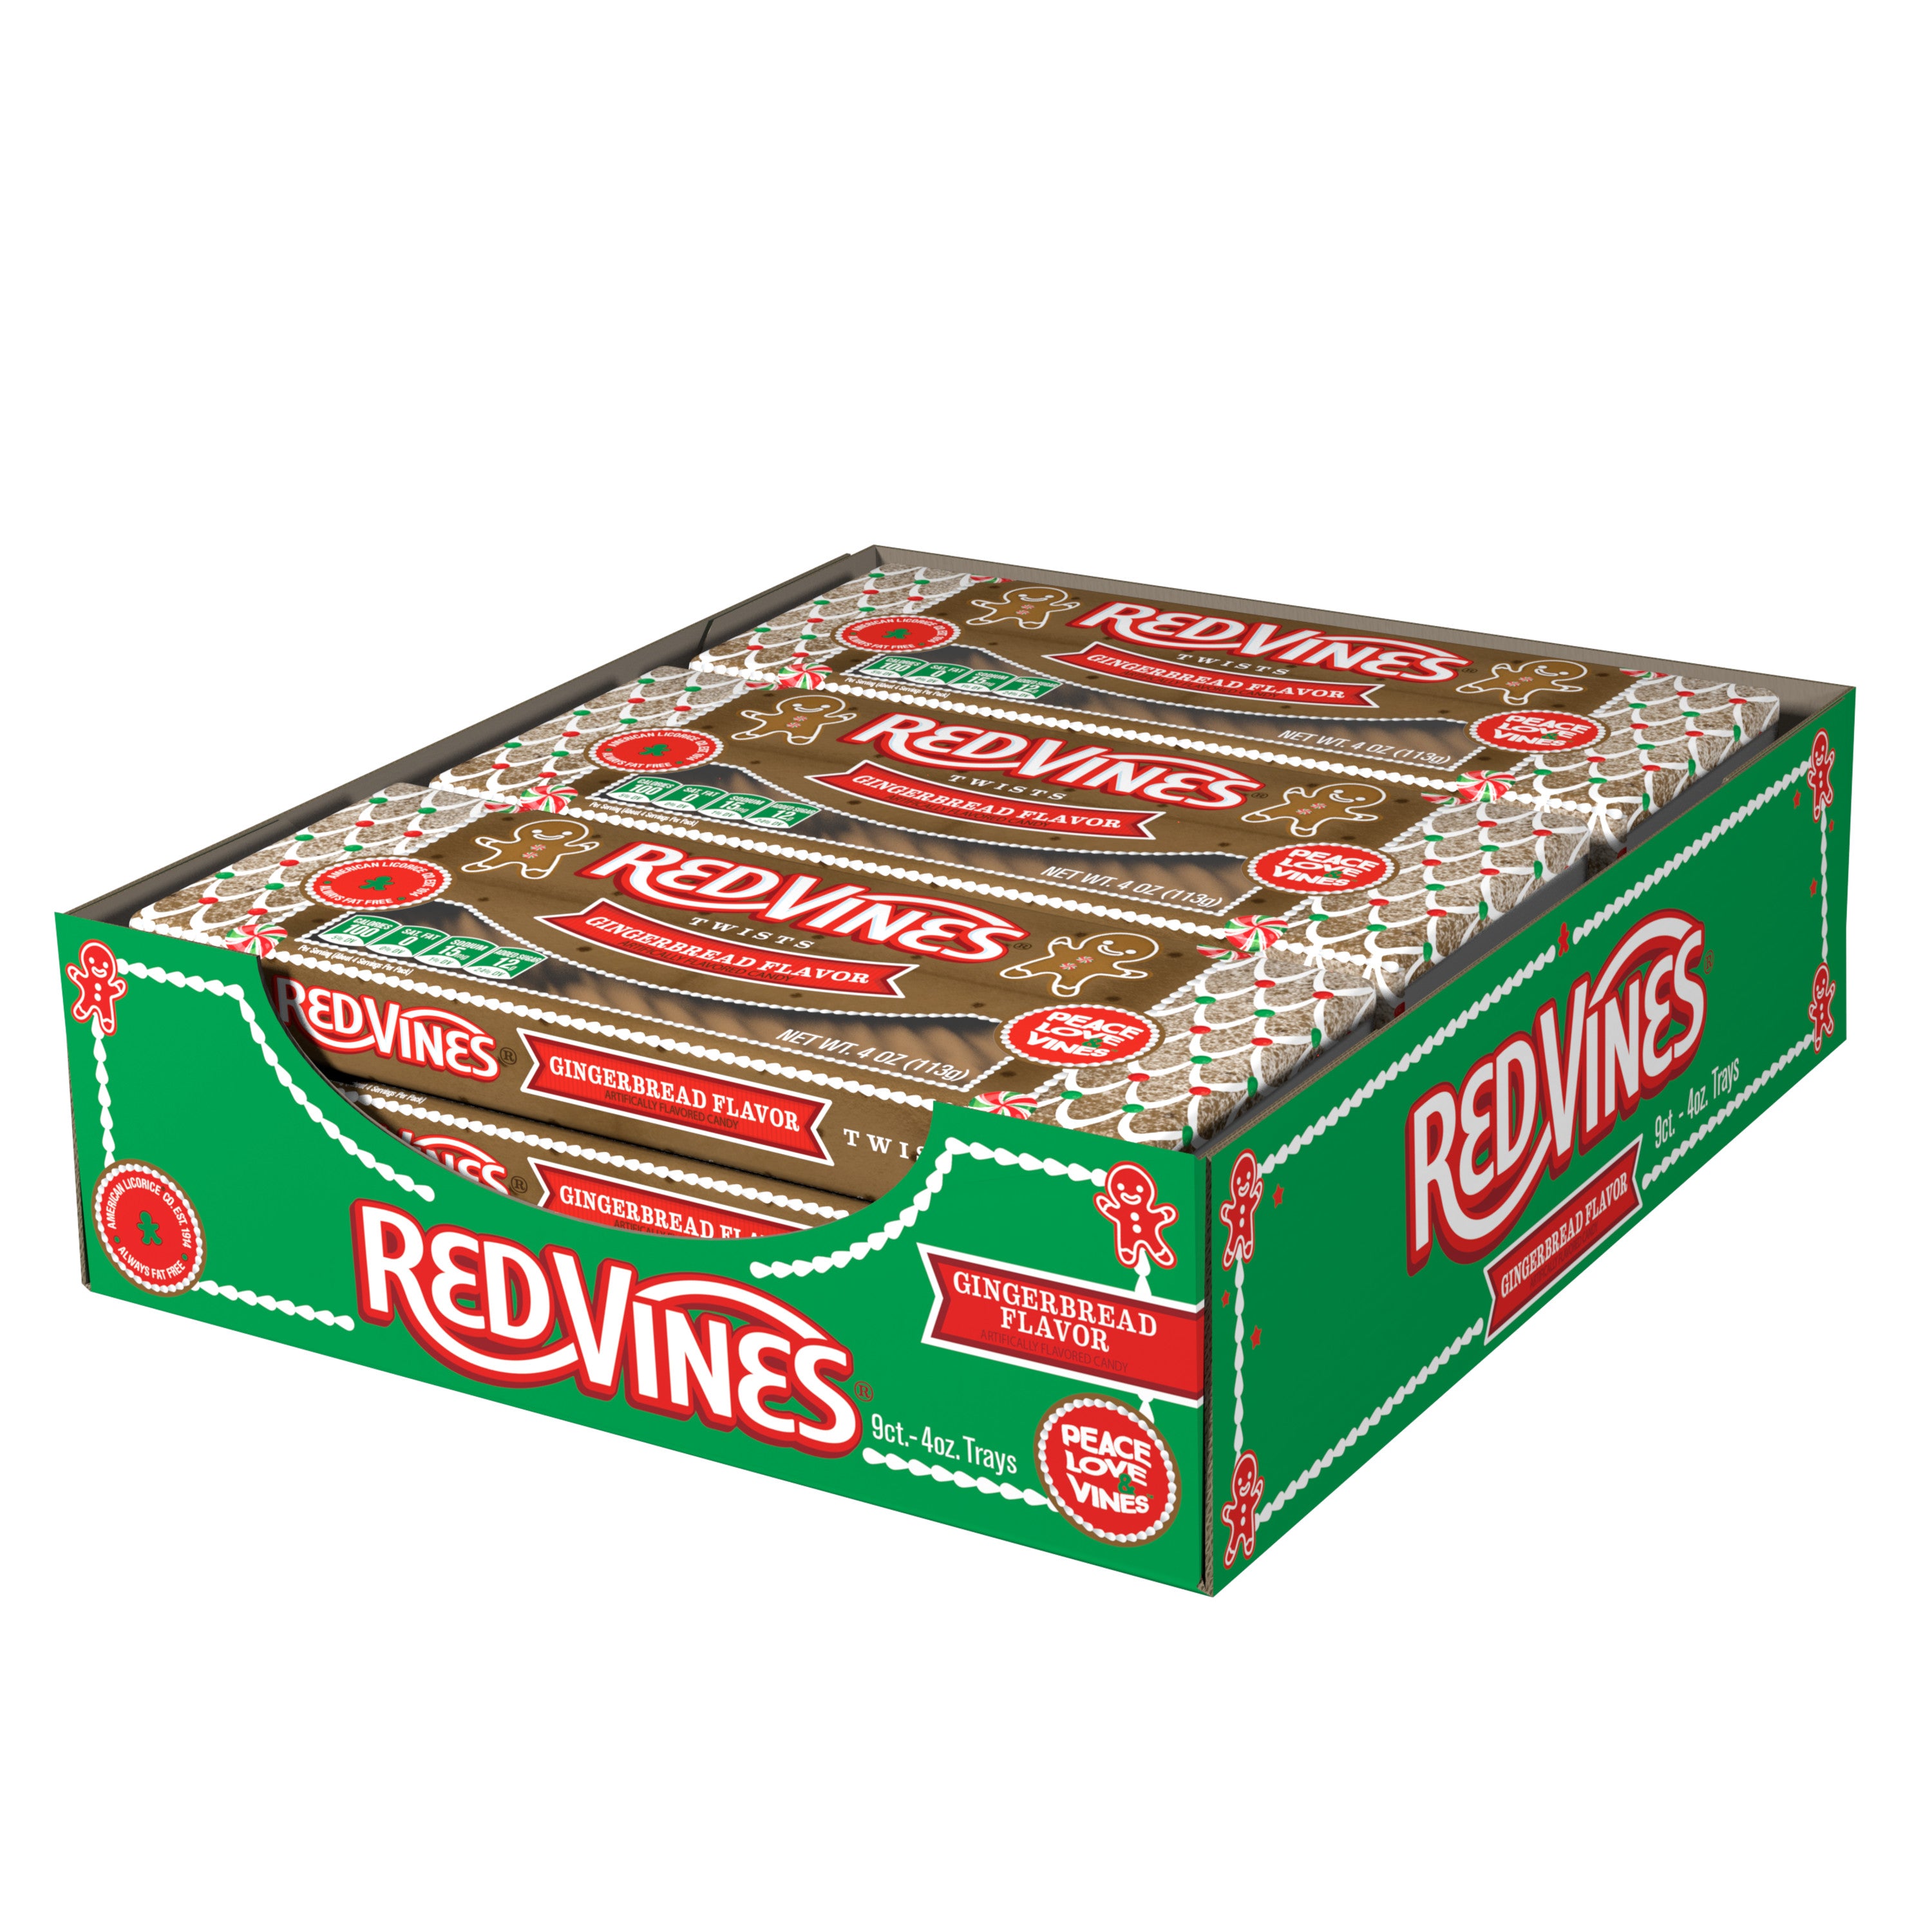 9 count box of RED VINES Gingerbread flavored licorice twists trays